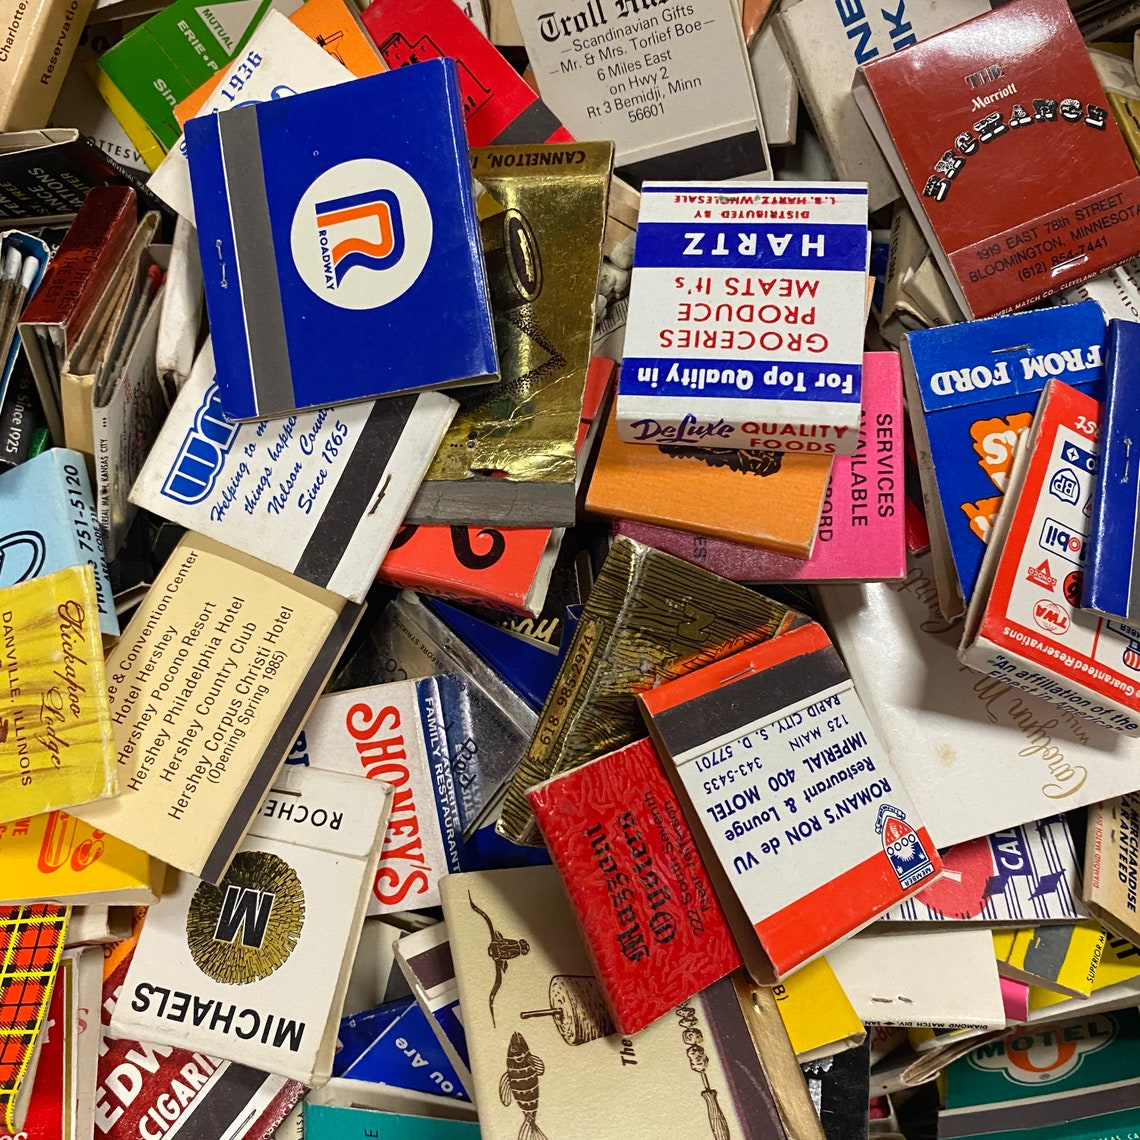 Lot of 30 Vintage Matchbooks Unstruck 40s to 90s Matches - Etsy